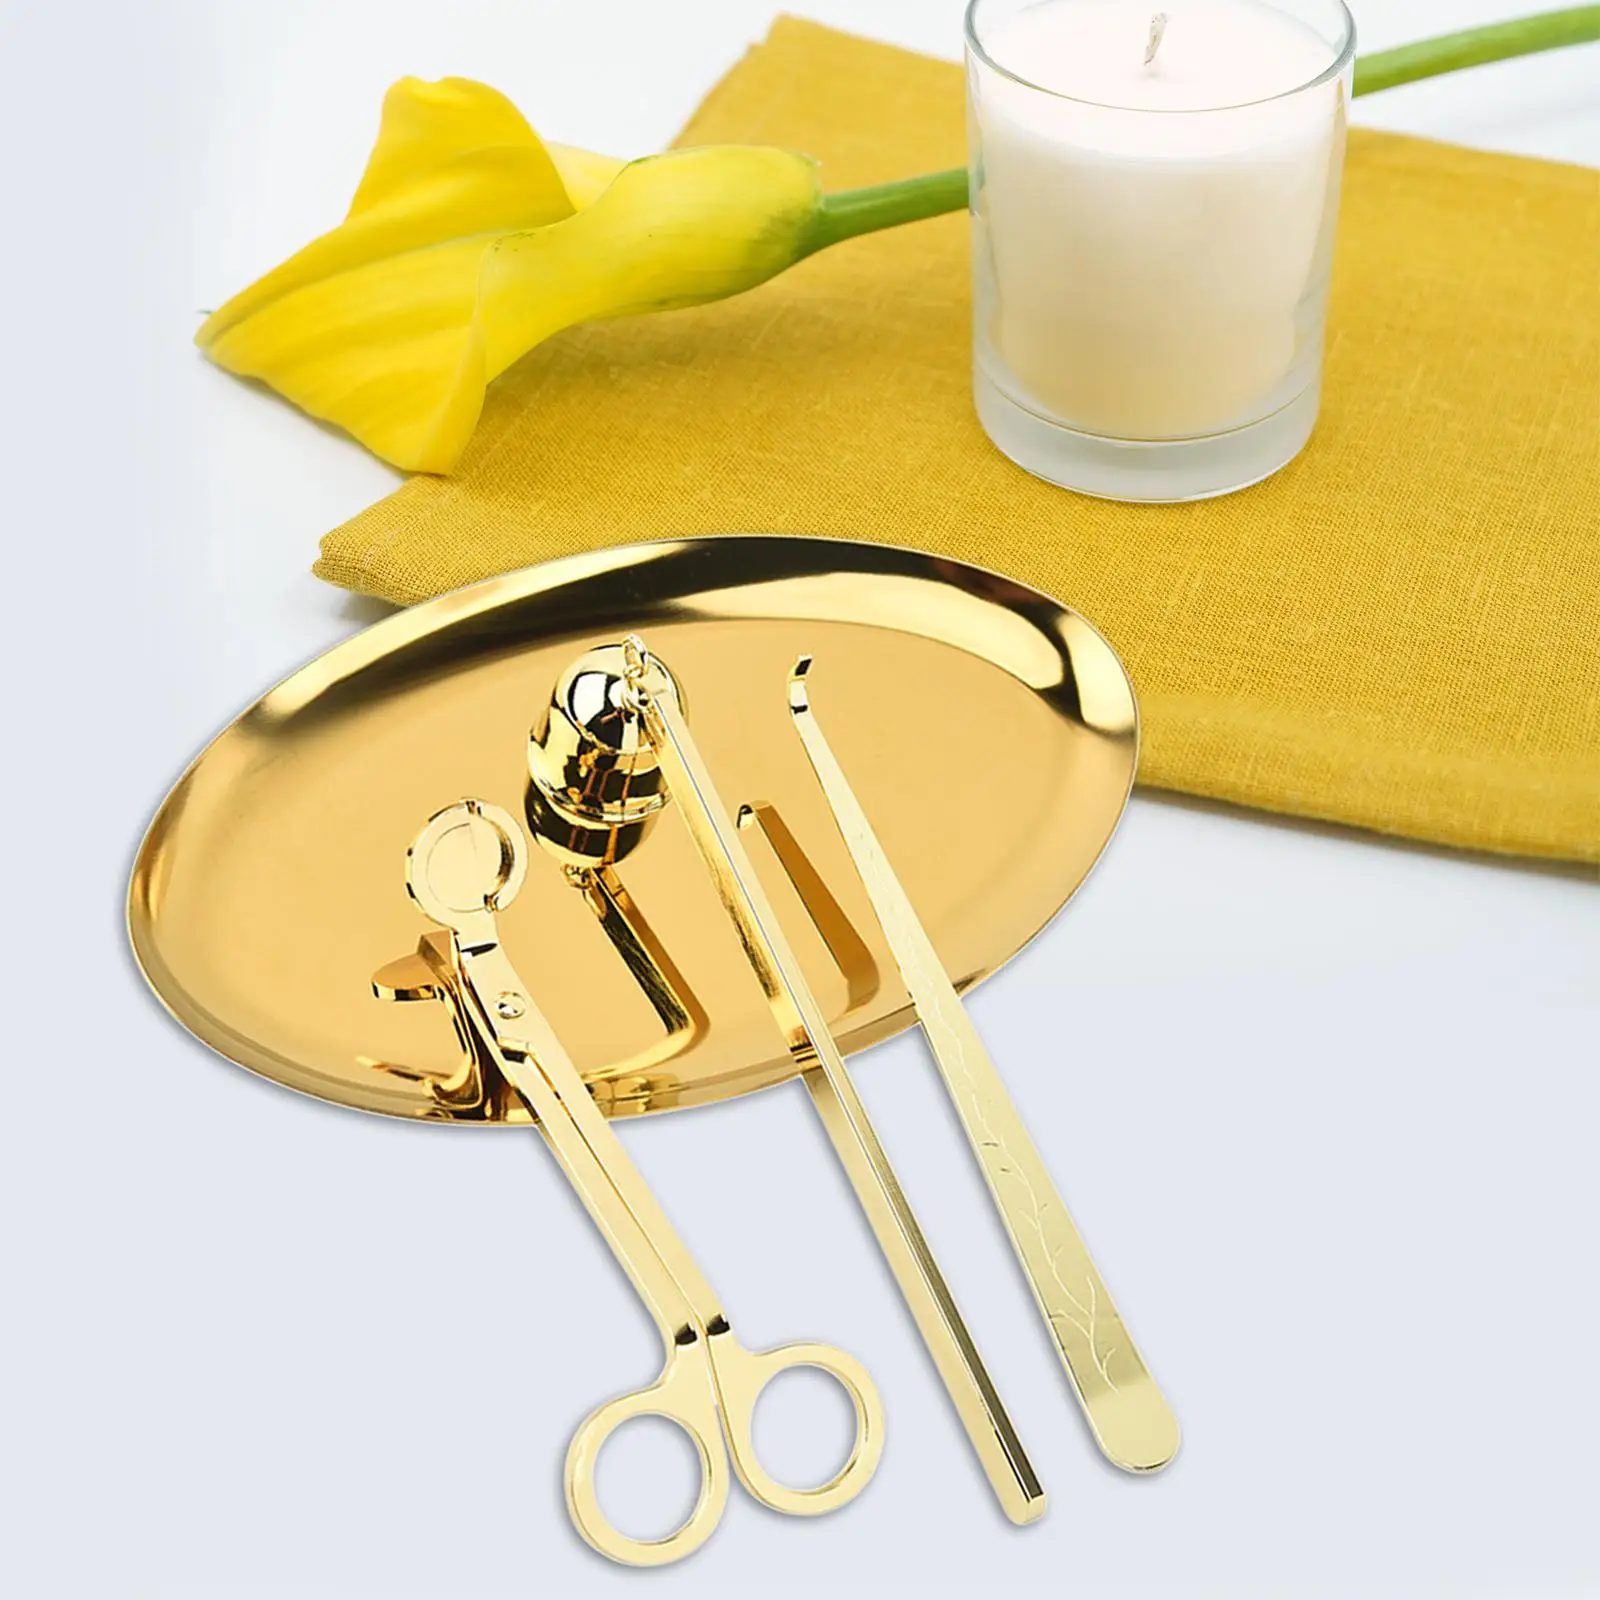 4Pcs Candle Accessories Wick Dipper Cutter Kit Sturdy Exquisite with Tray